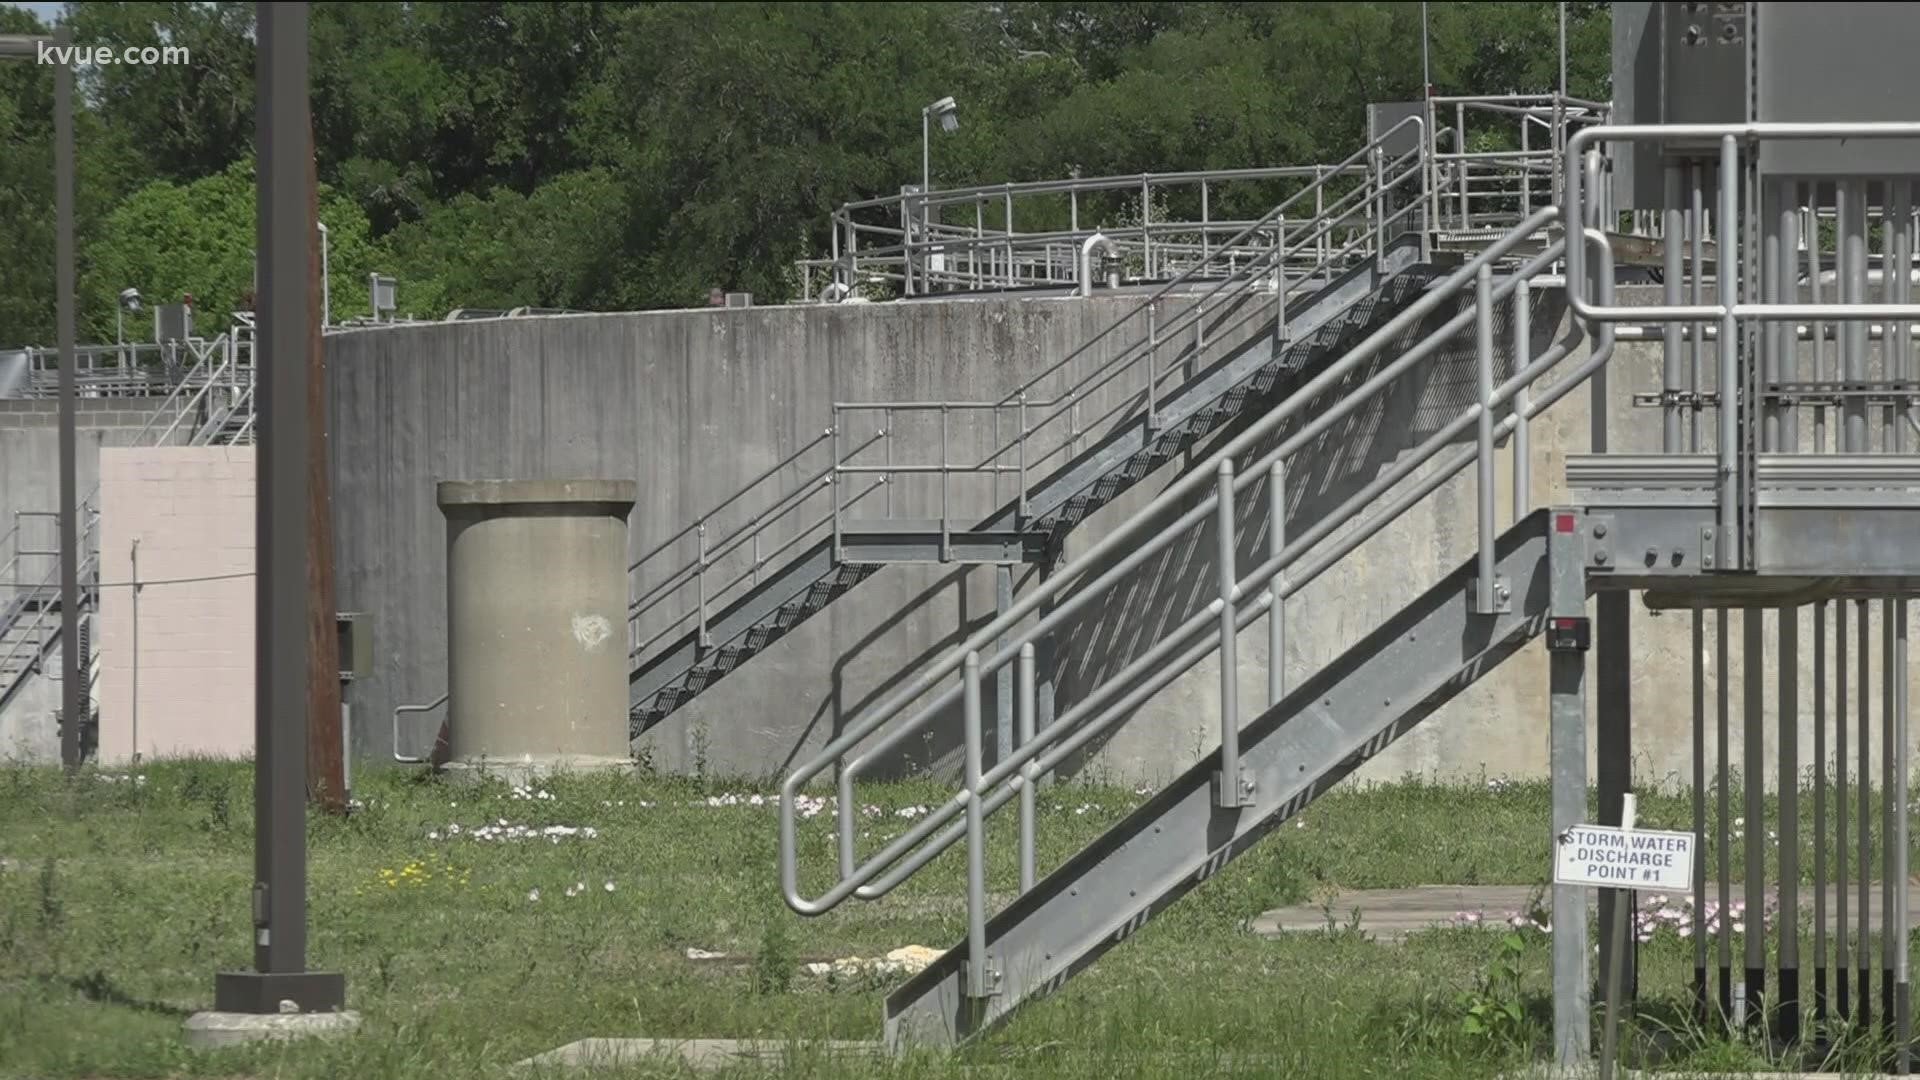 Williamson County will give more than $72 million to cities to improve their water infrastructure. This will help cities get started on major projects.